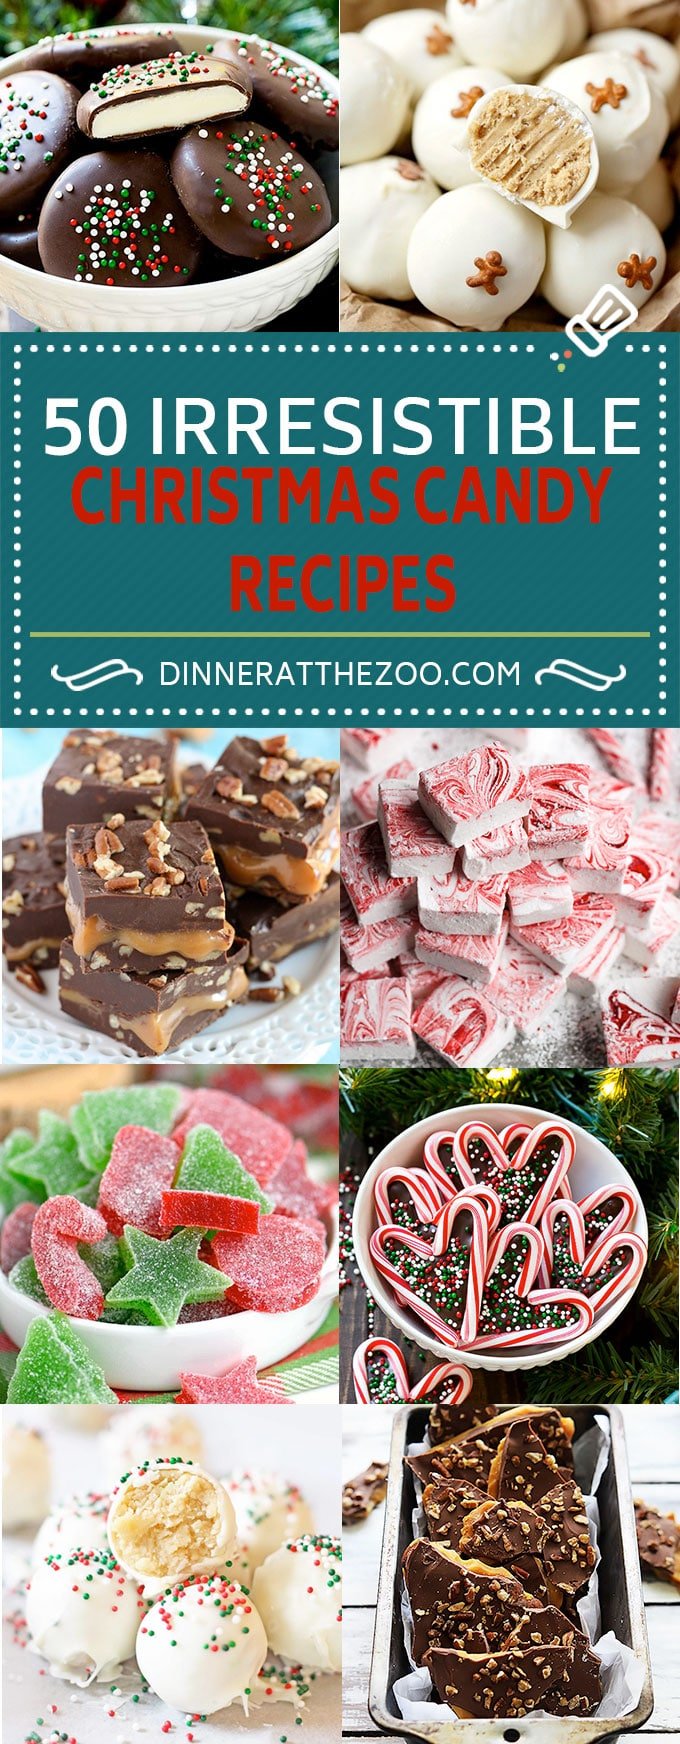 50 Irresistible Christmas Candy Recipes | Candy Recipes | Fudge Recipes | Truffle Recipes | Caramel Recipes